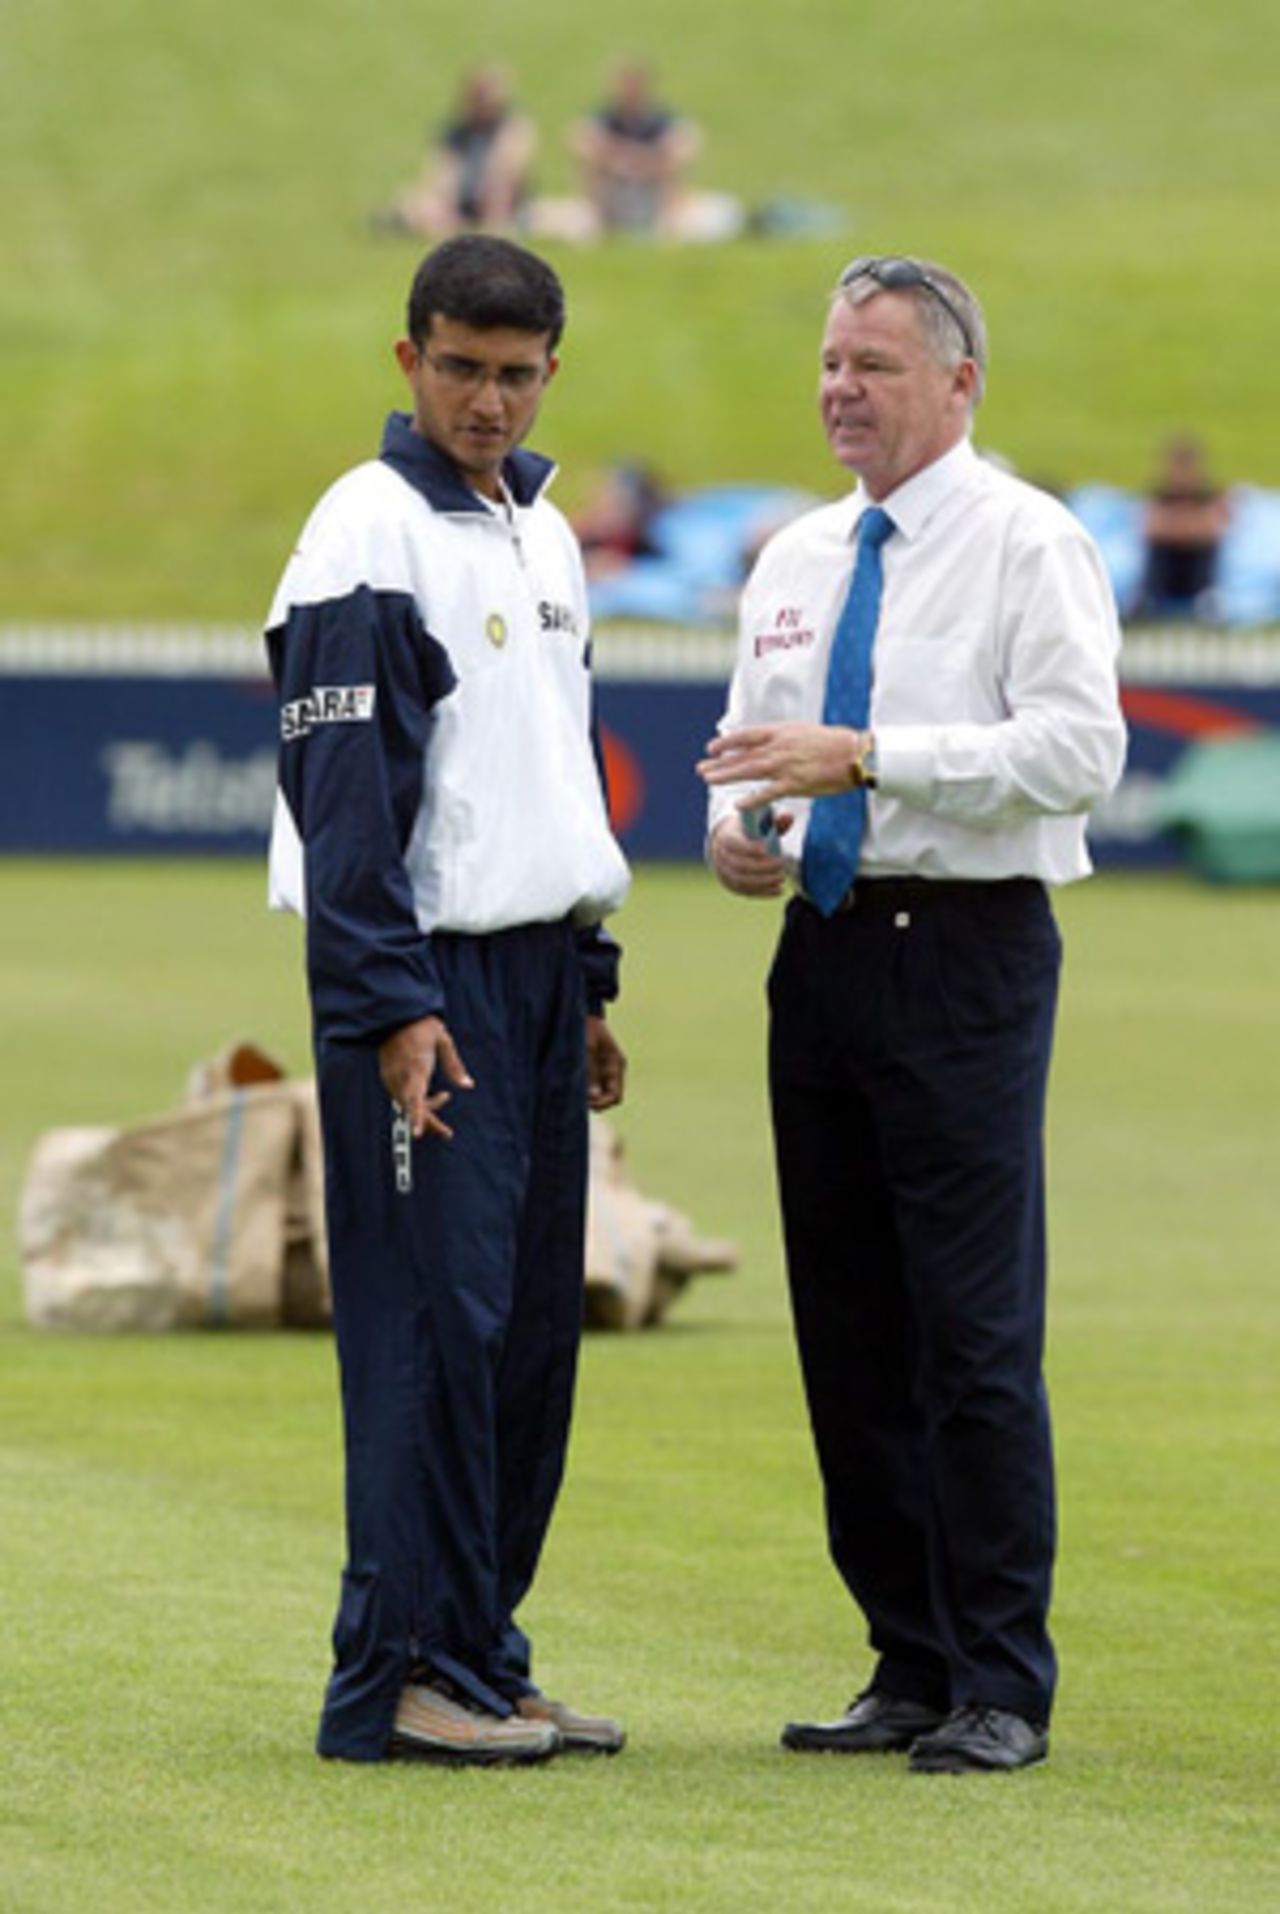 Indian captain Sourav Ganguly (left) talks to match referee Mike Procter about the condition of the ground as the start of play is delayed. Play was eventually abandoned on day one. 2nd Test: New Zealand v India at Westpac Park, Hamilton, 19-23 December 2002 (19 December 2002).